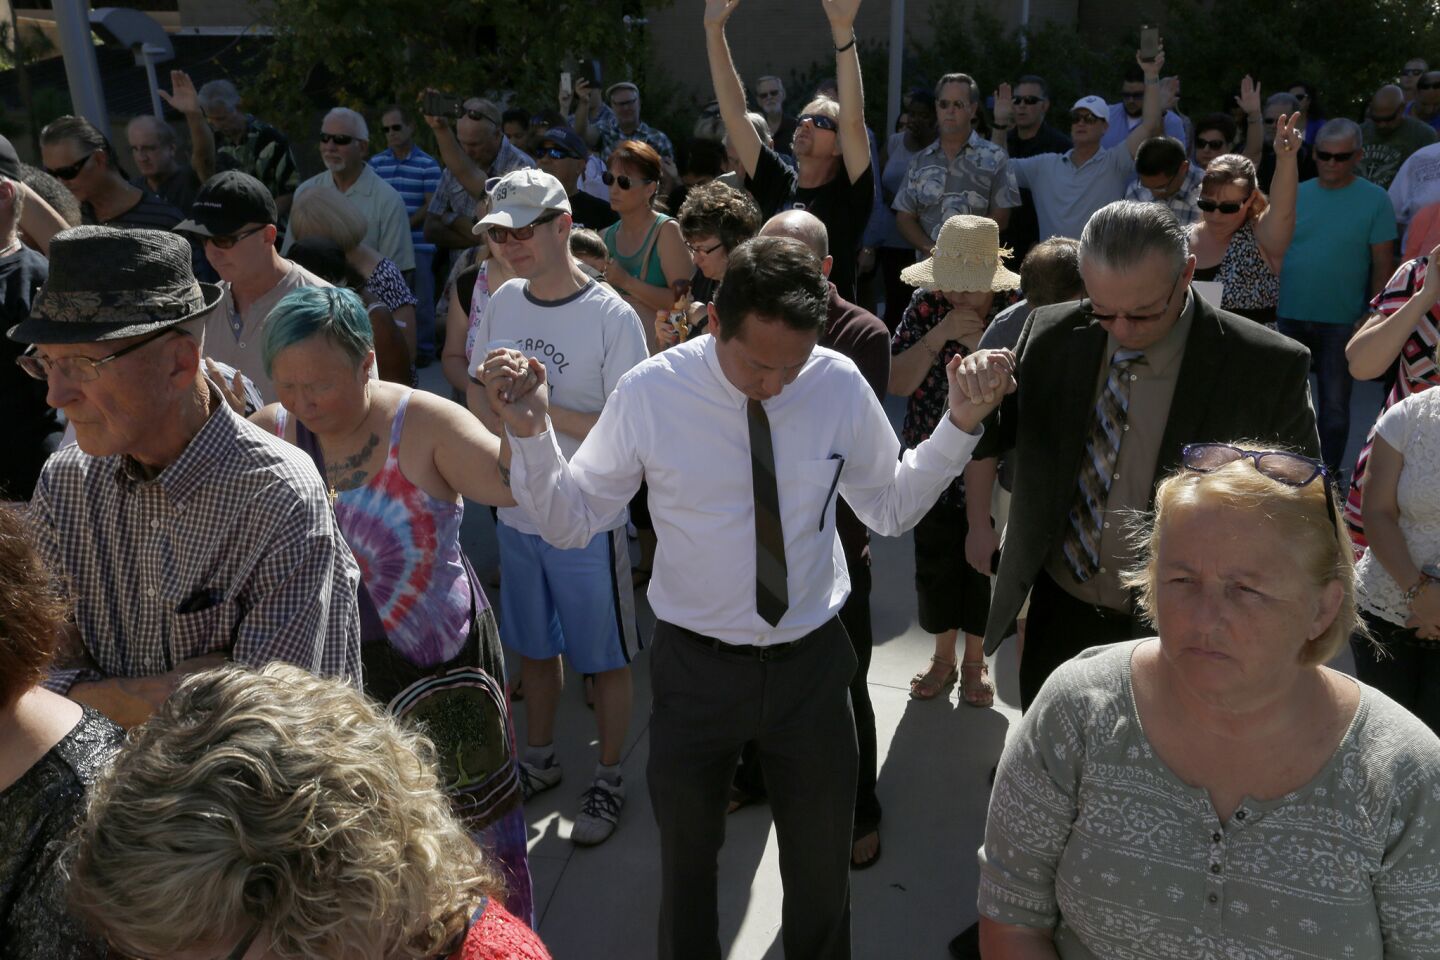 Members of the community pray outside the El Cajon Police Department.